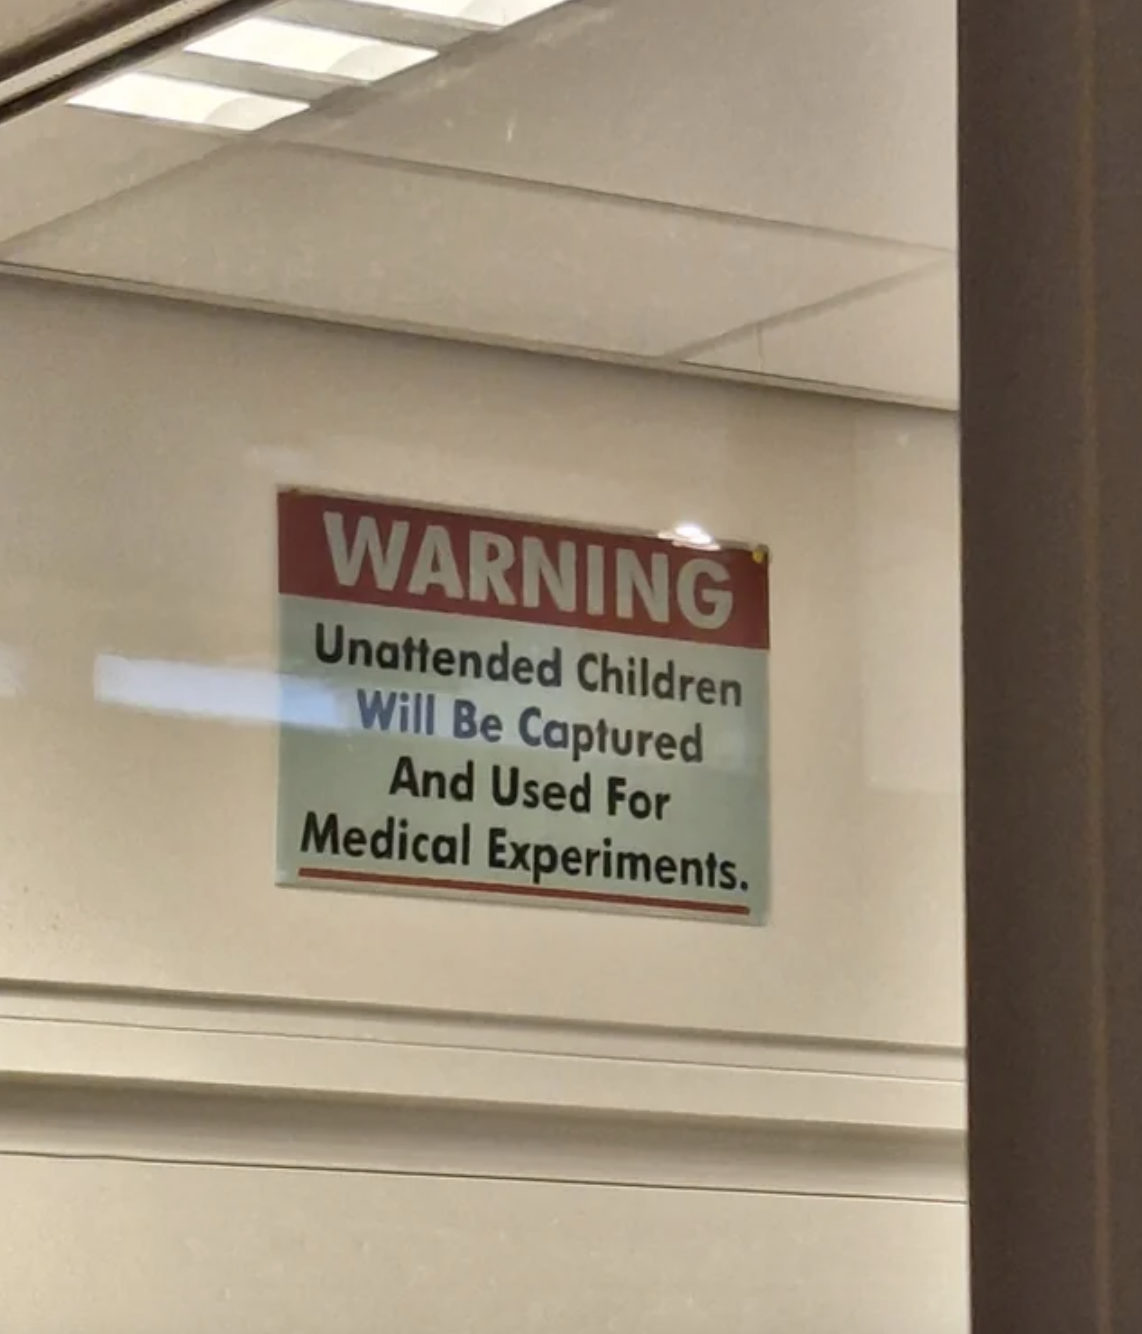 warning, unattended children will be captured and used for medical experiments